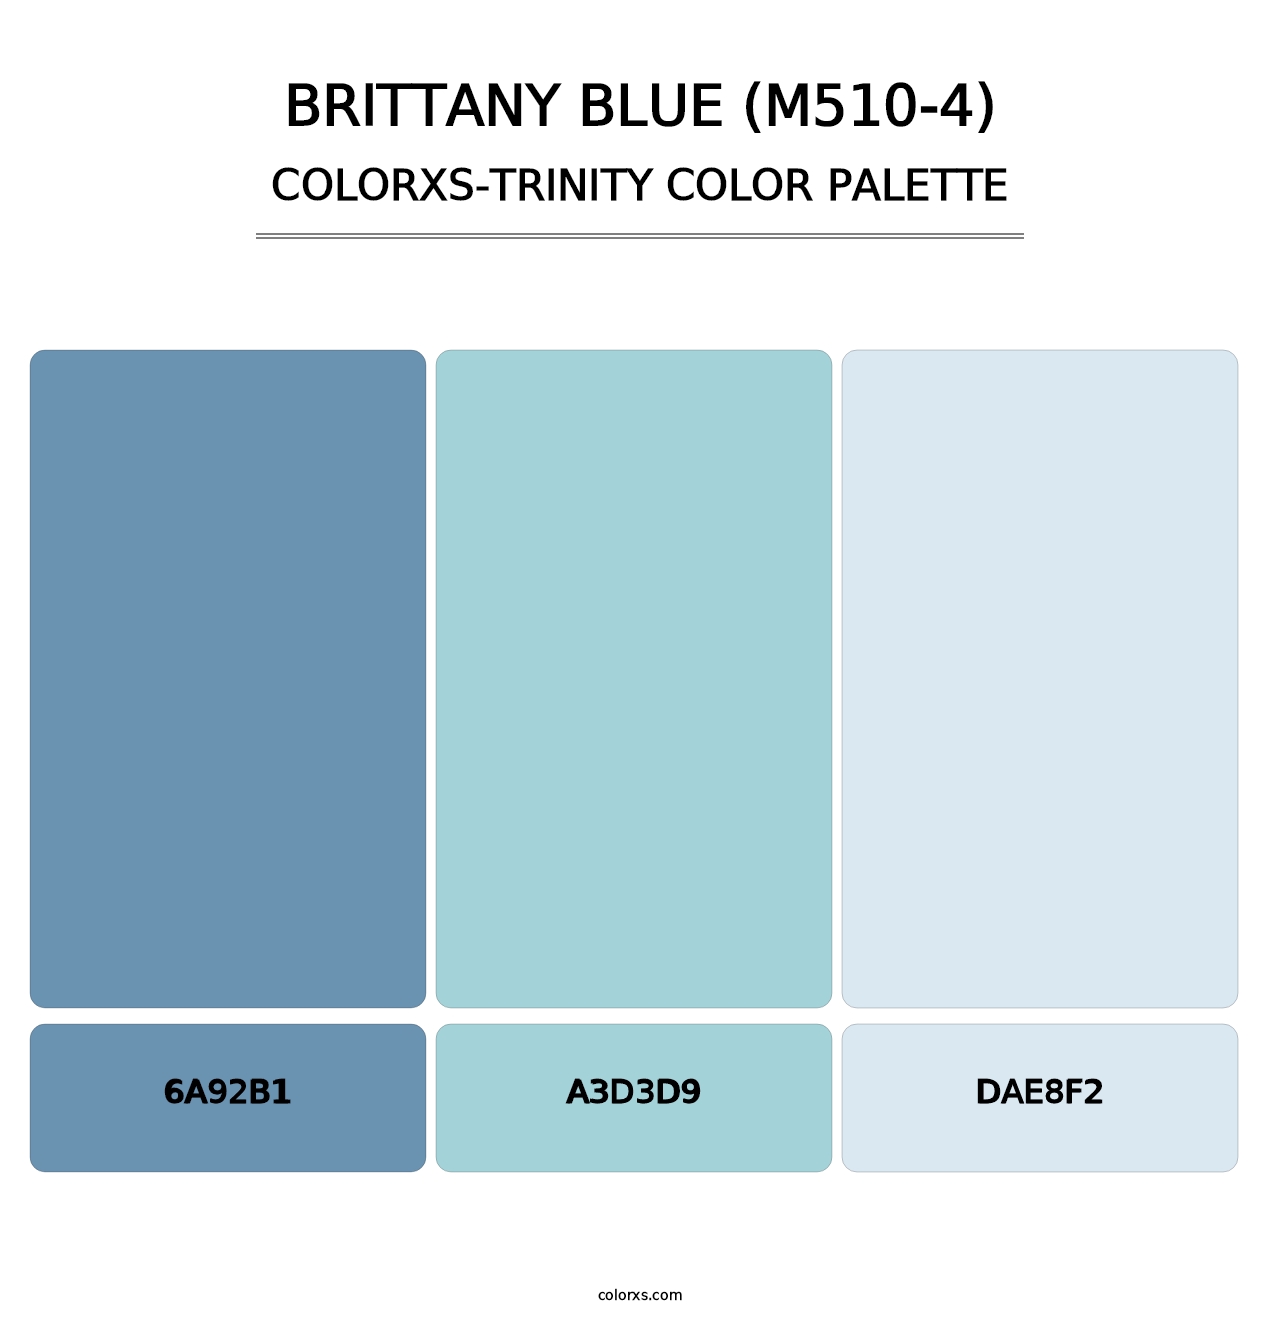 Brittany Blue (M510-4) - Colorxs Trinity Palette